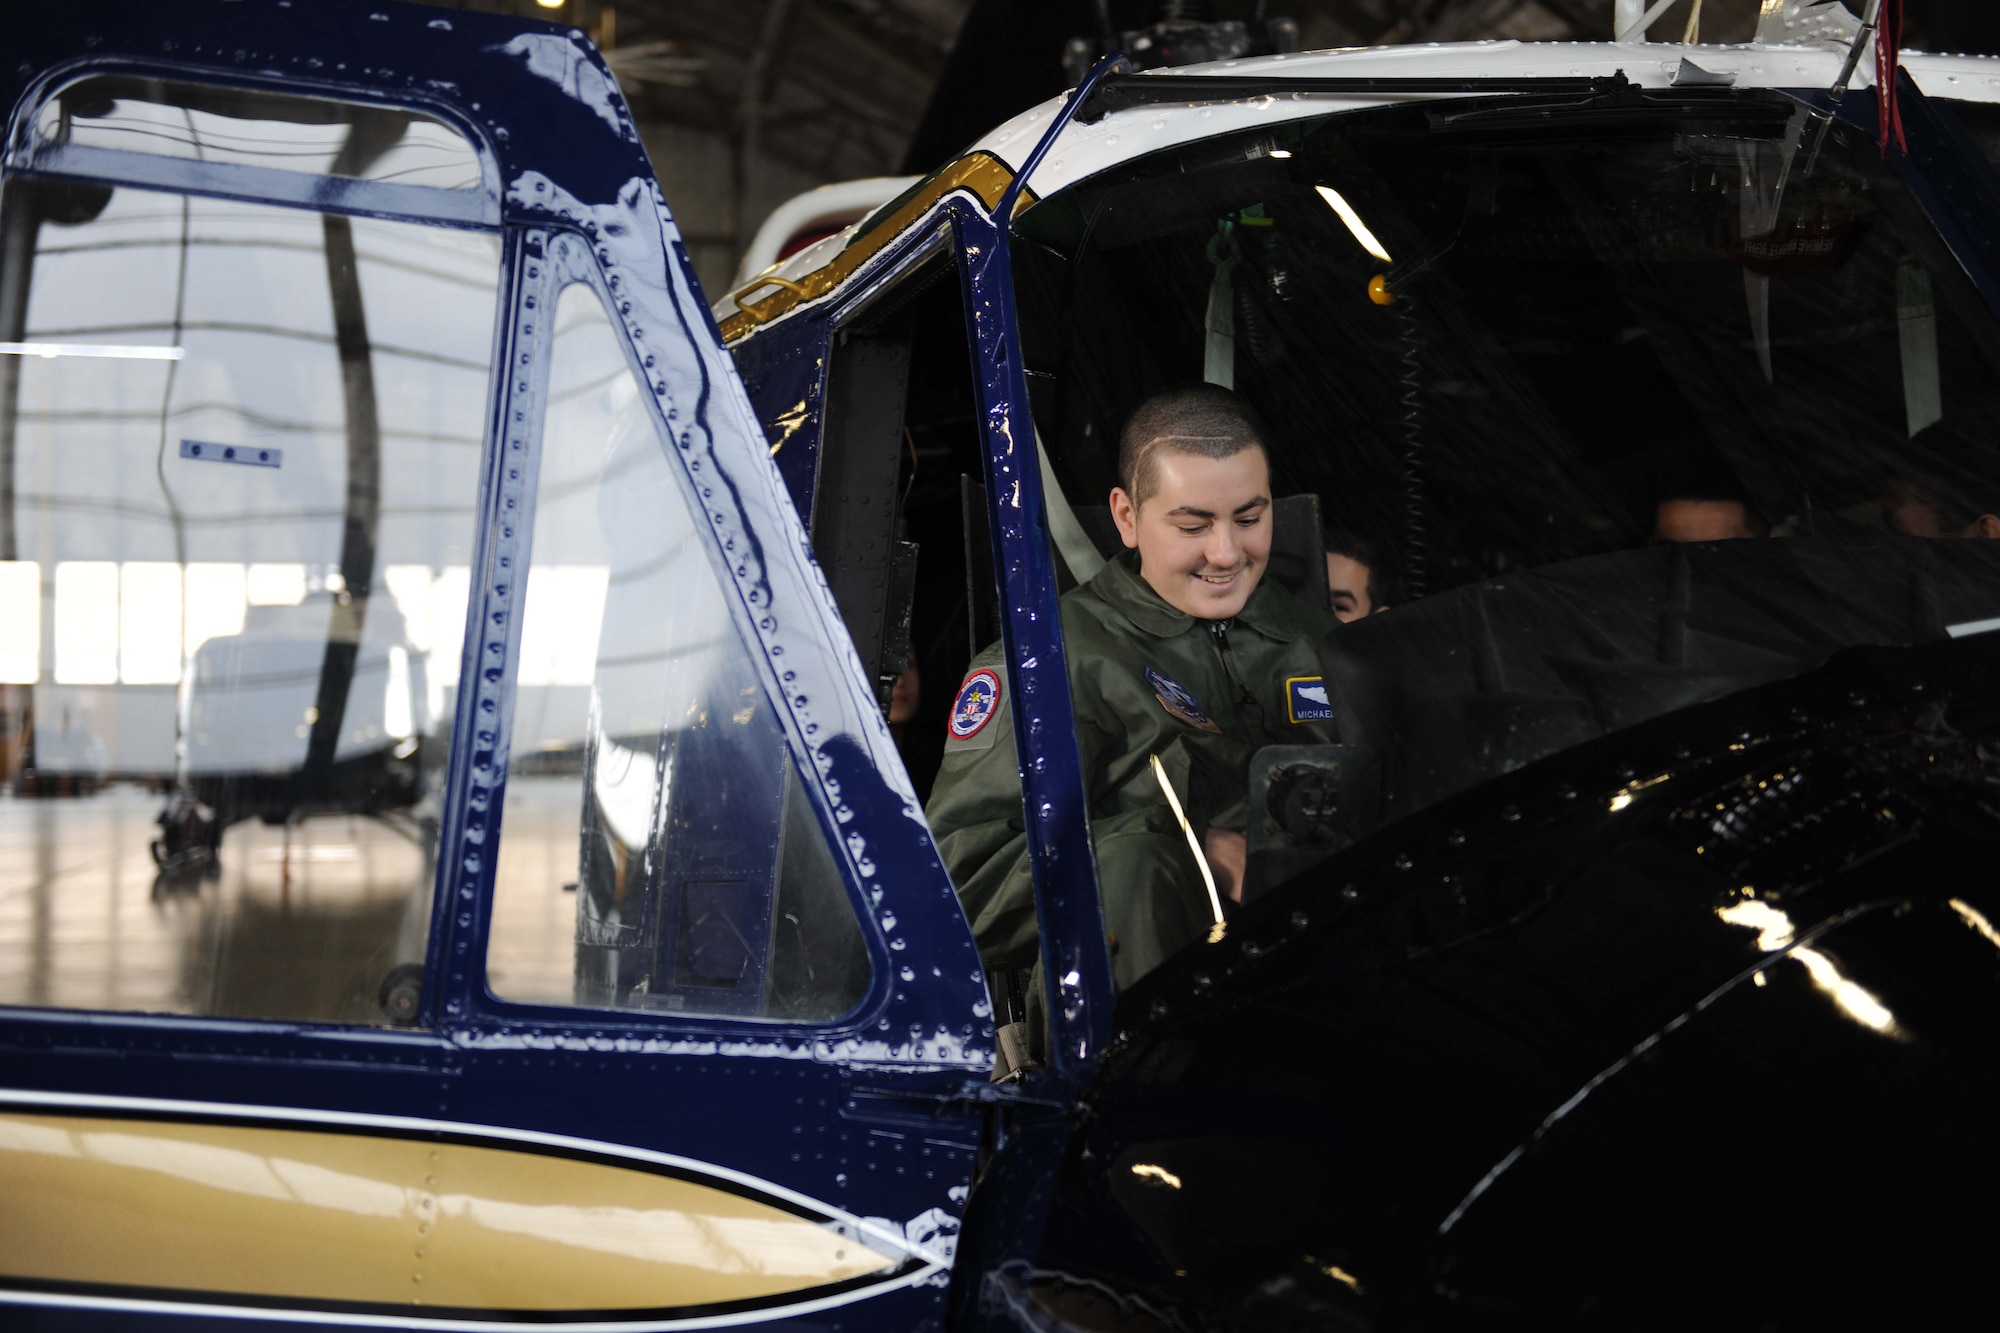 Michael Oliver, Pilot for a Day participant, sits in a UH-1N Huey helicopter at Joint Base Andrews, Md., Feb. 5, 2016. Oliver, diagnosed with Erdheim-Chester Disease, a disease with no known cure, experienced what it is like to be a pilot for a day along with friends and family. The day included touring an assortment of aircraft including an F-16 Fighting Falcon, KC-135 Stratotanker and a UH-1N Huey helicopter. (U.S. Air Force photo by Senior Airman Dylan Nuckolls/Released)